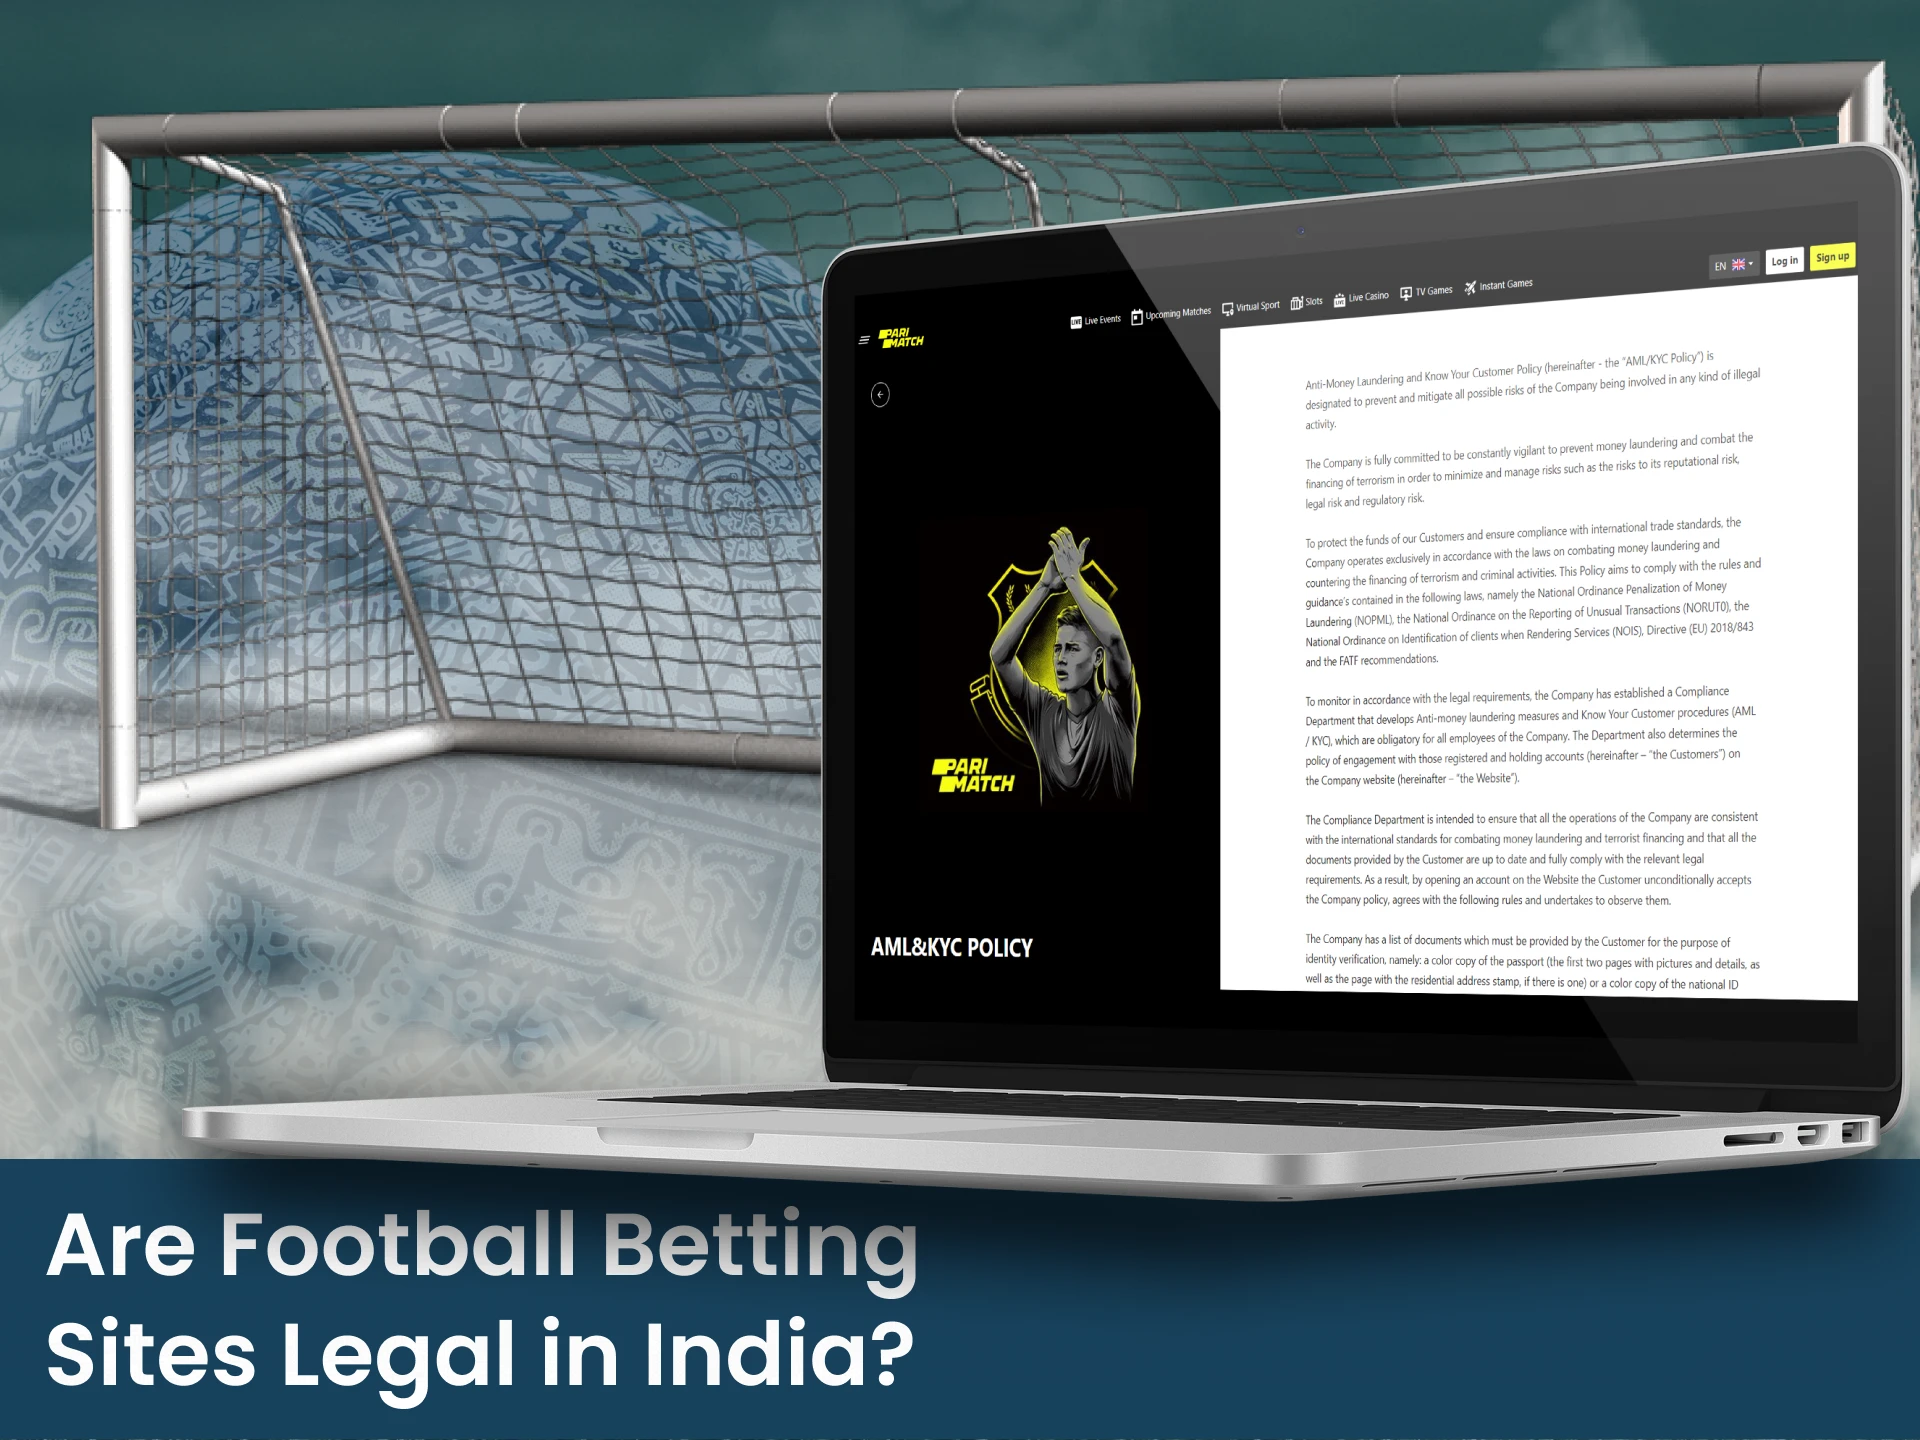 You can bet on football online legally in India.